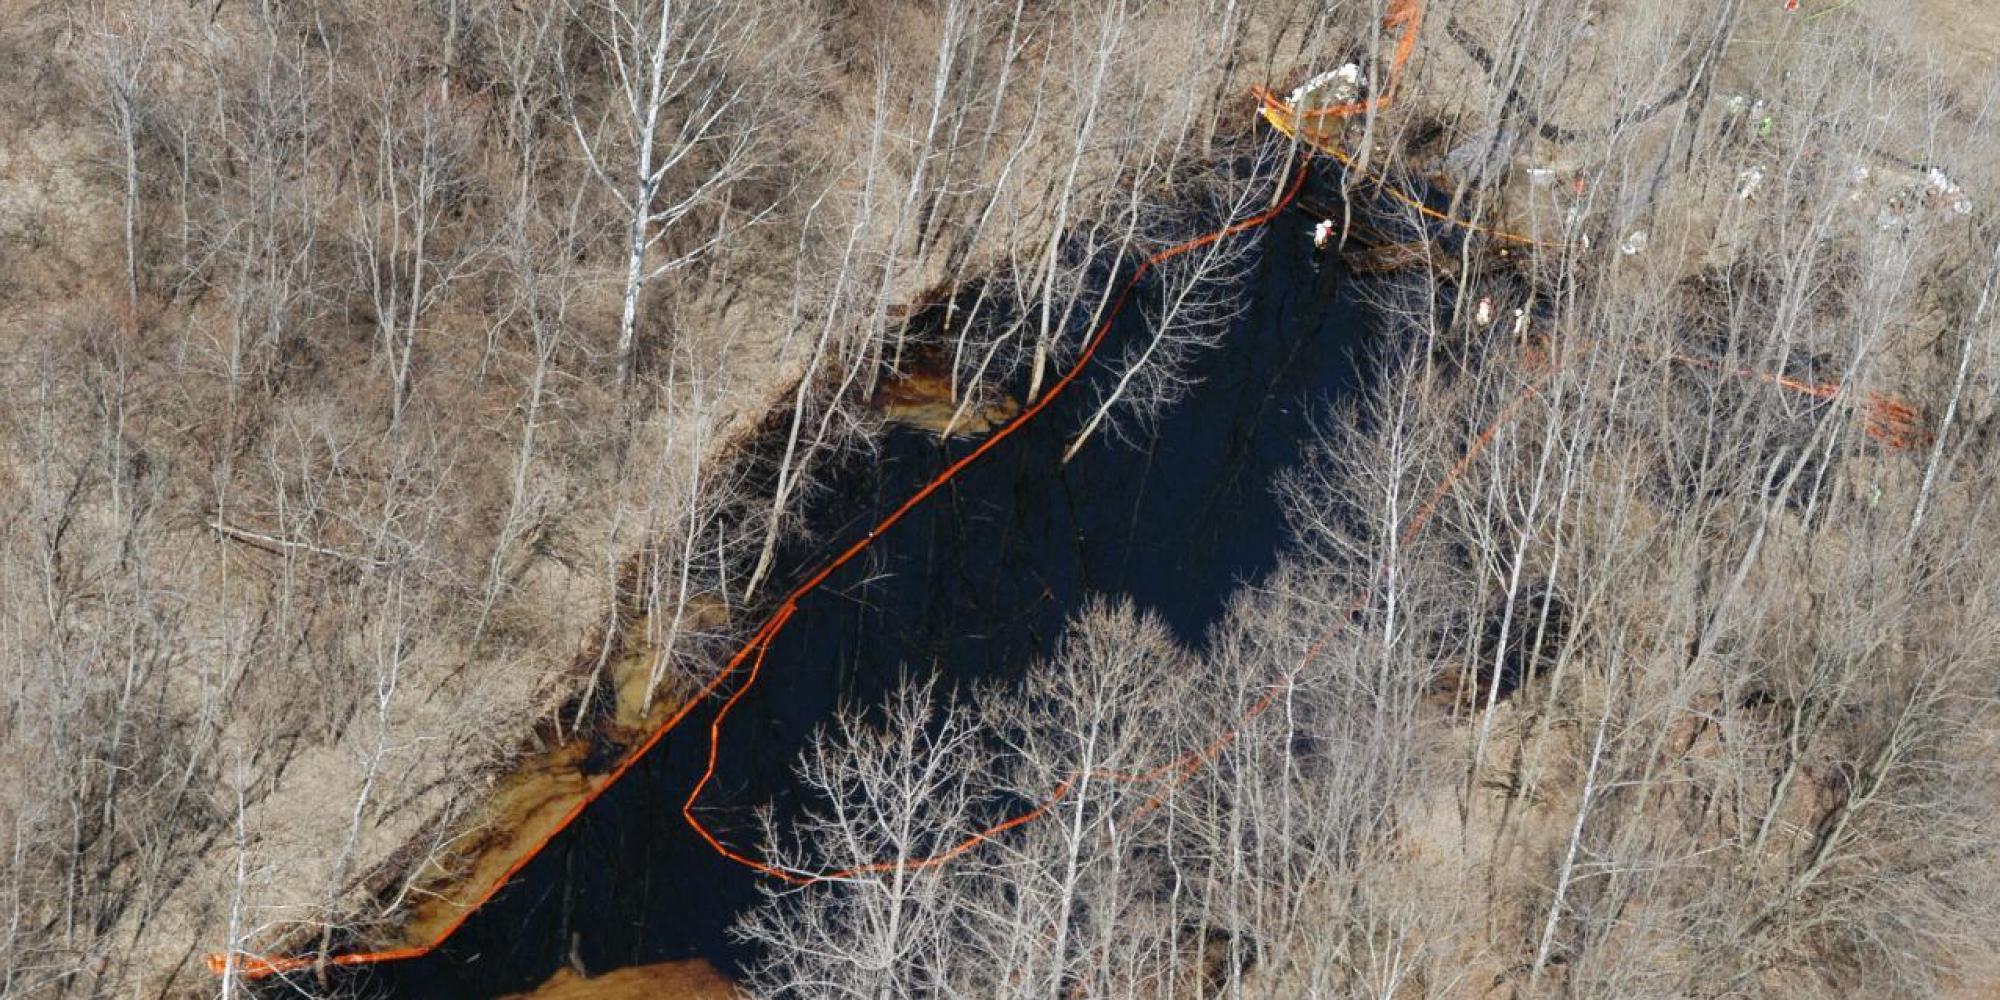 Leaking Pipeline in Ohio Spills 20,000 Gallons of Oil in Nature Preserve